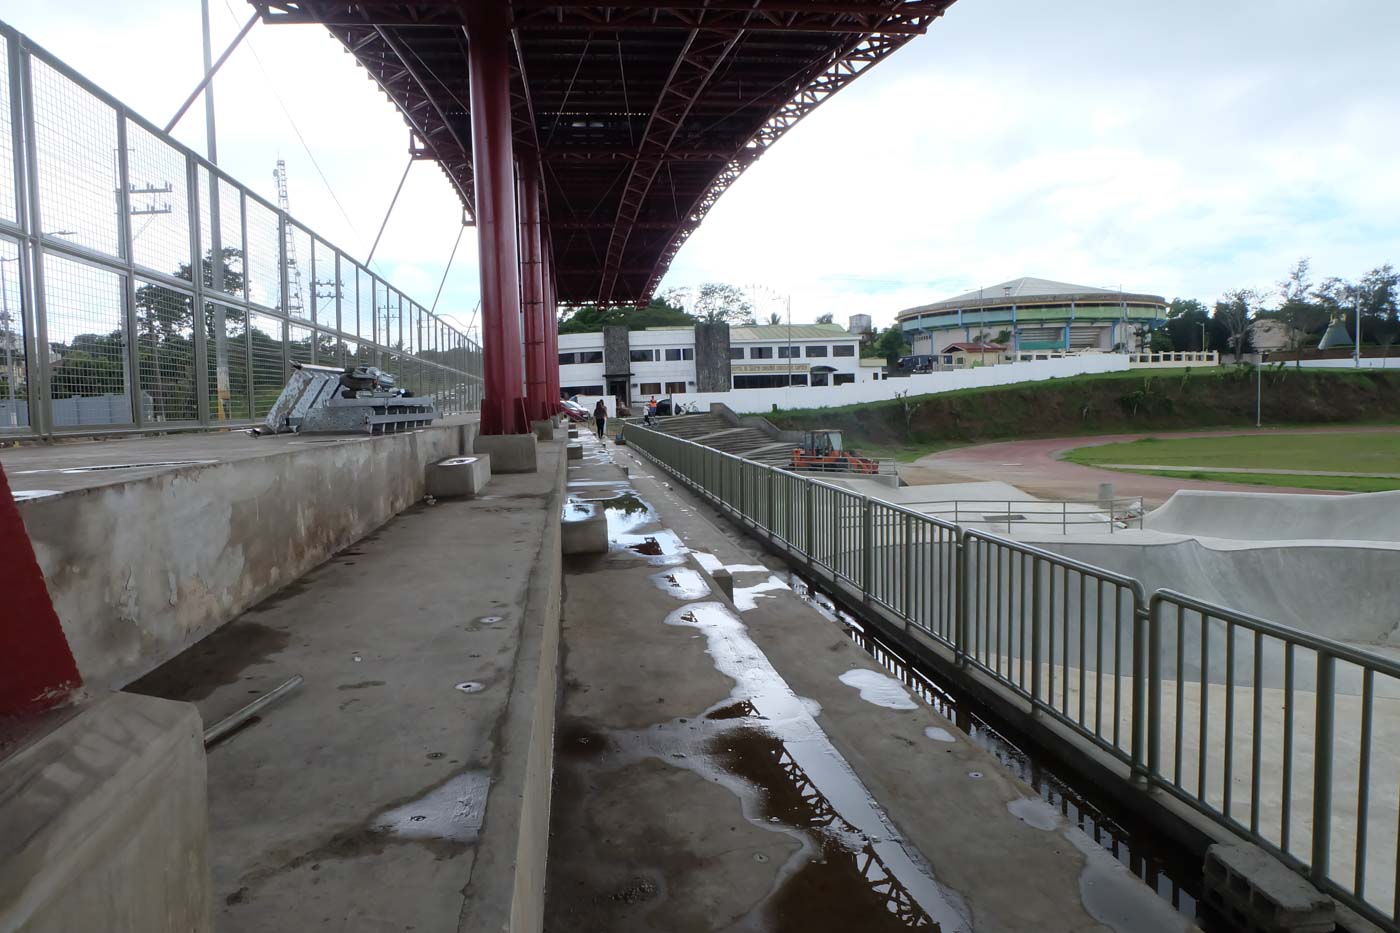 RAIN PROOF? Puddles of water can be seen in the spectators area after the rain. Photo by Beatrice Go/Rappler  